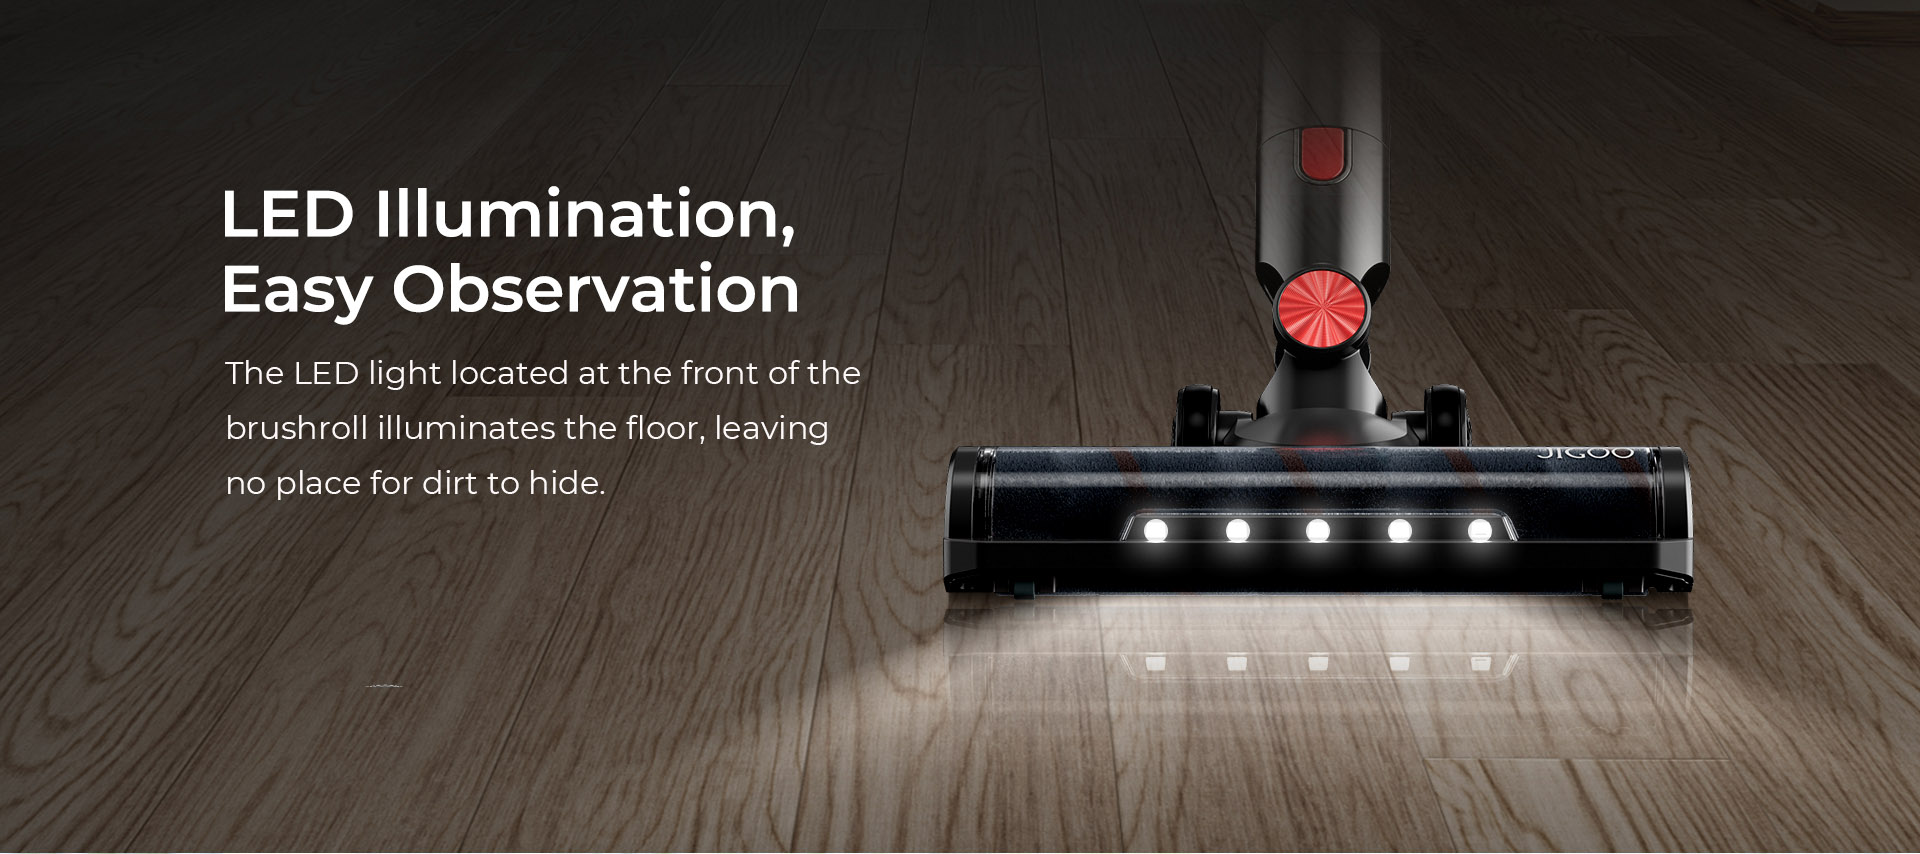 JIGOO C500 Cordless Vacuum Cleaner, 33KPa Suction, 500W Motor, Smart Dust Sensor, 1.2L Dust Cup, Up to 60 Mins Runtime, 2200mAh Removable Battery, LED Touch Screen, Rotatable Metal Tube